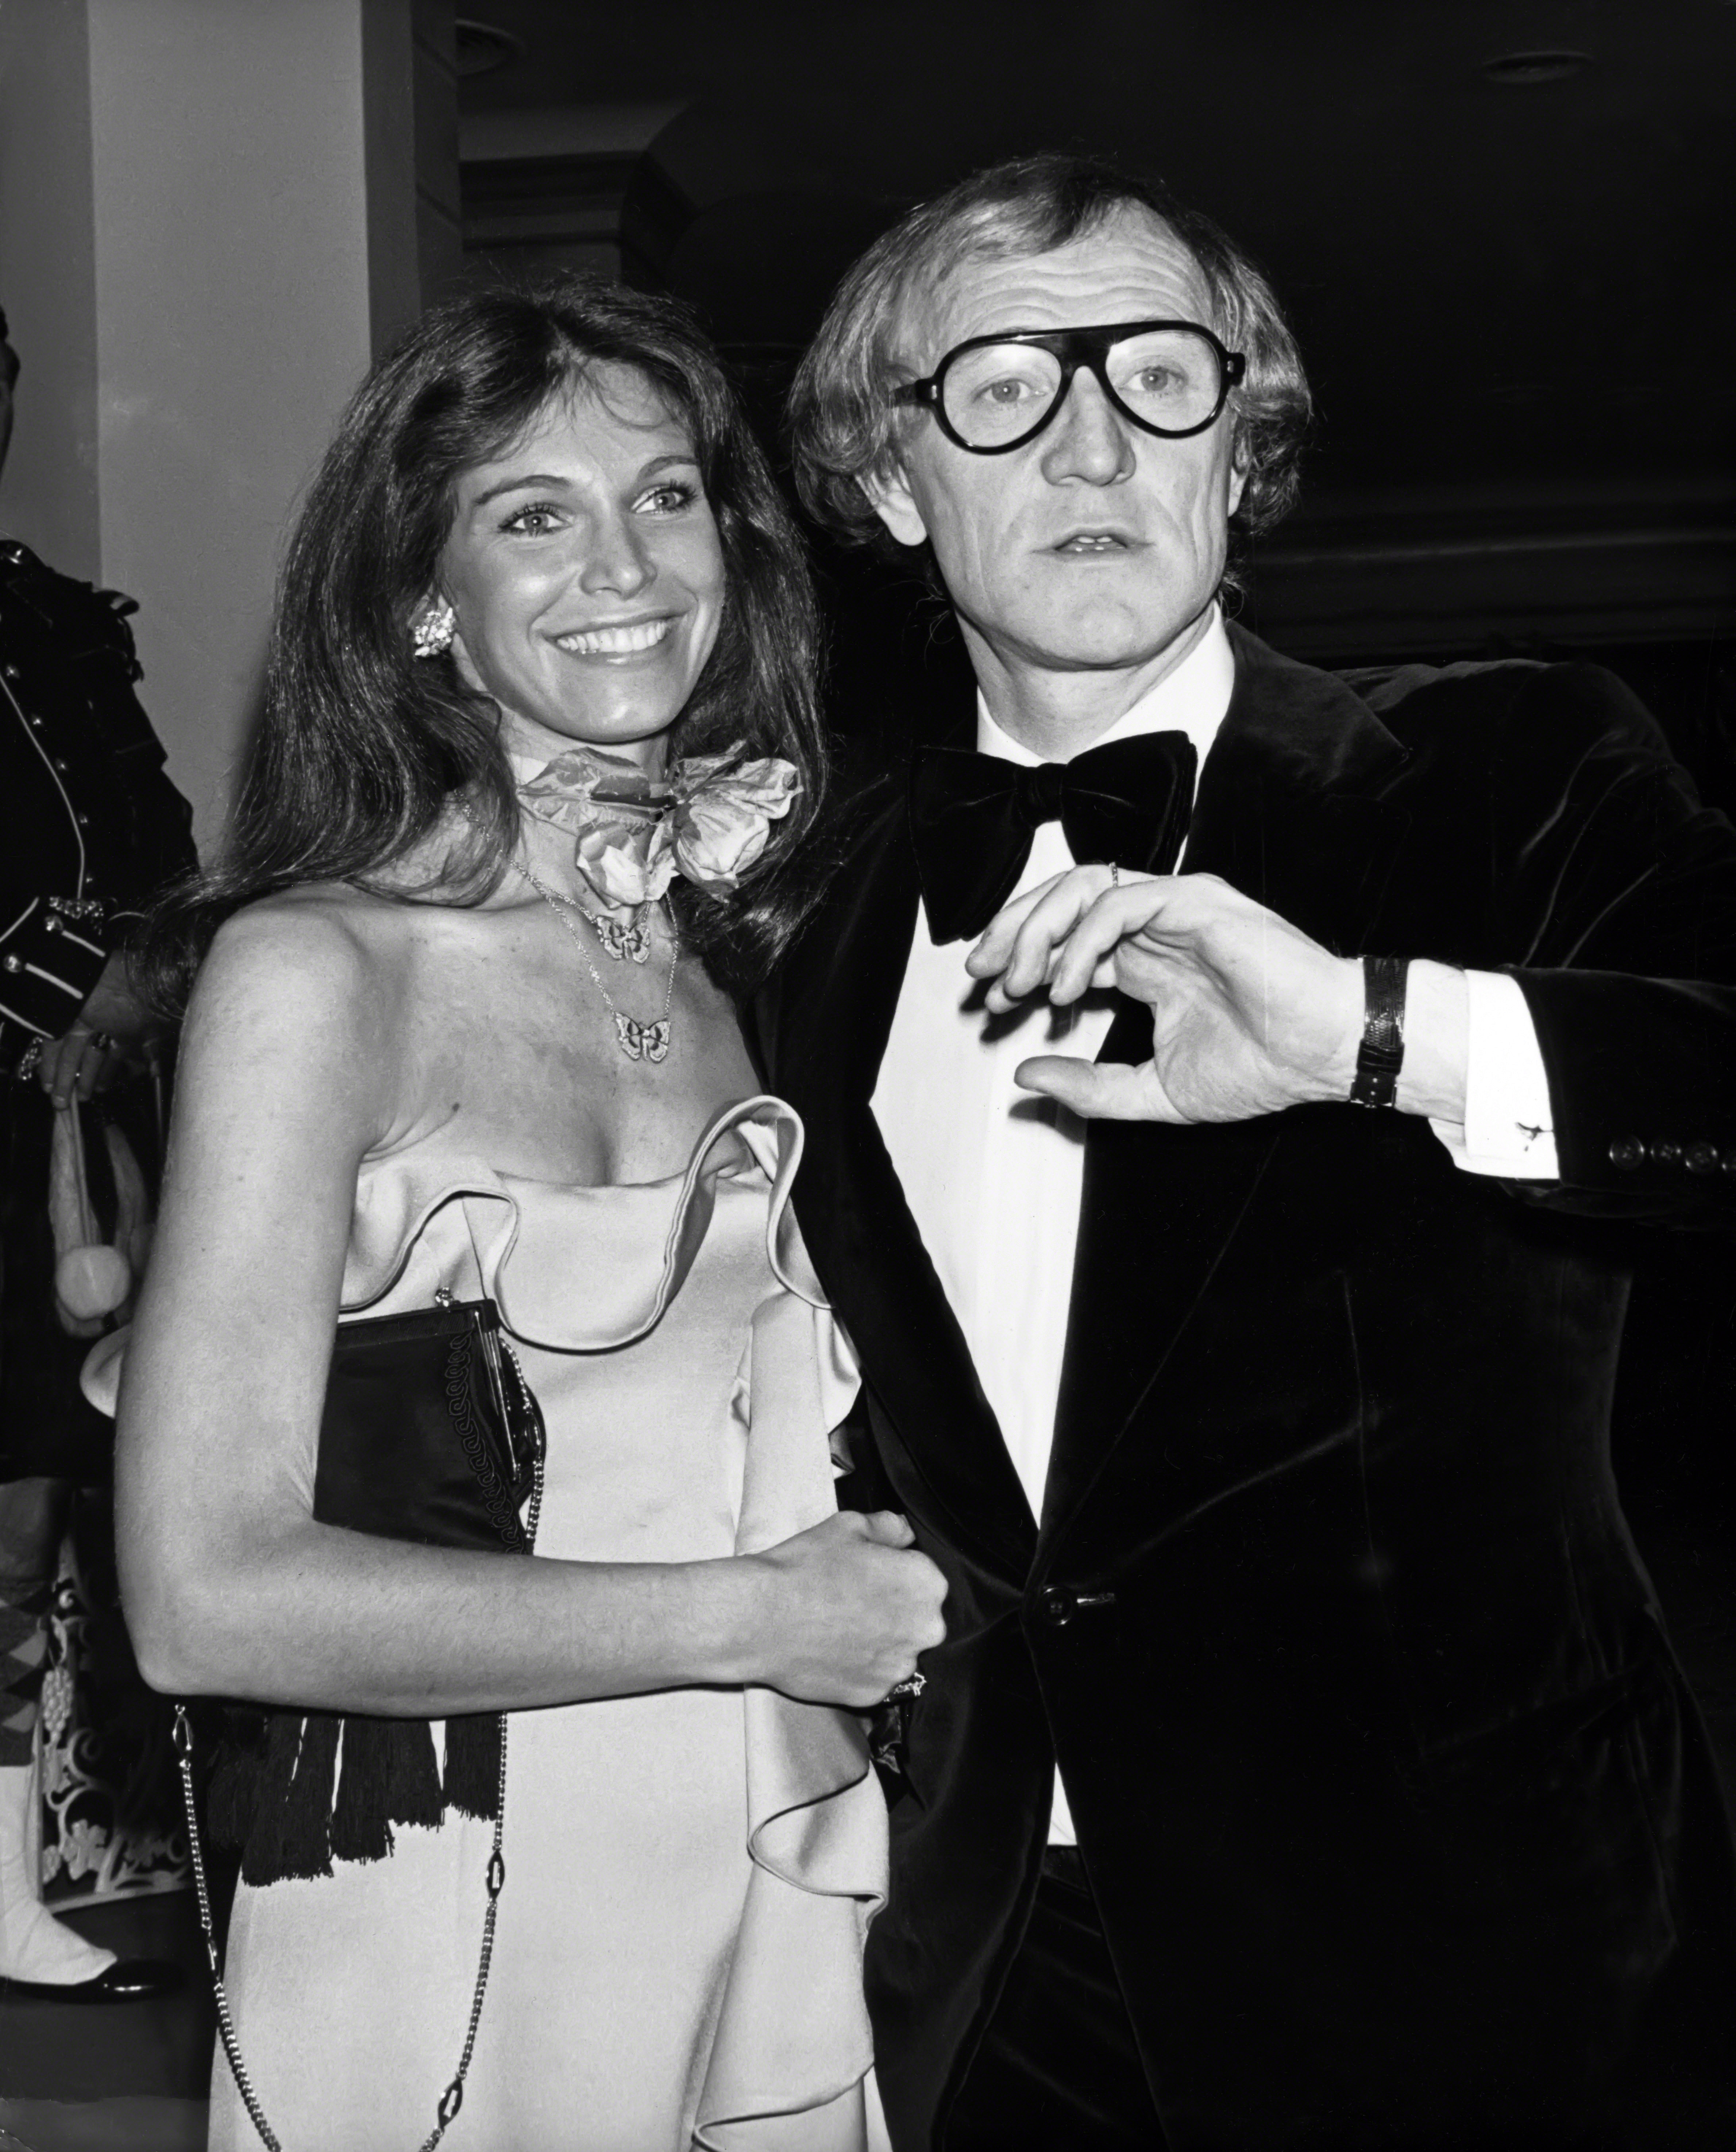 Richard Harris and Ann Turkel in New York circa 1975 | Source: Getty Images